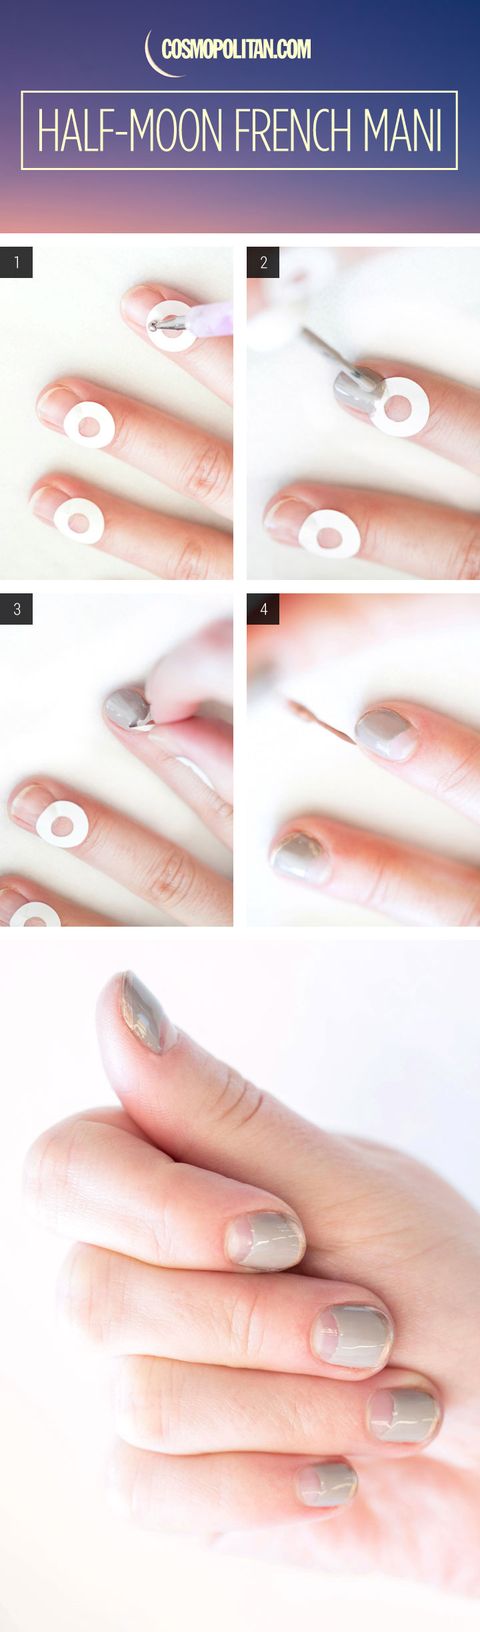 How To Half Moon French Manicure Half Moon Nails